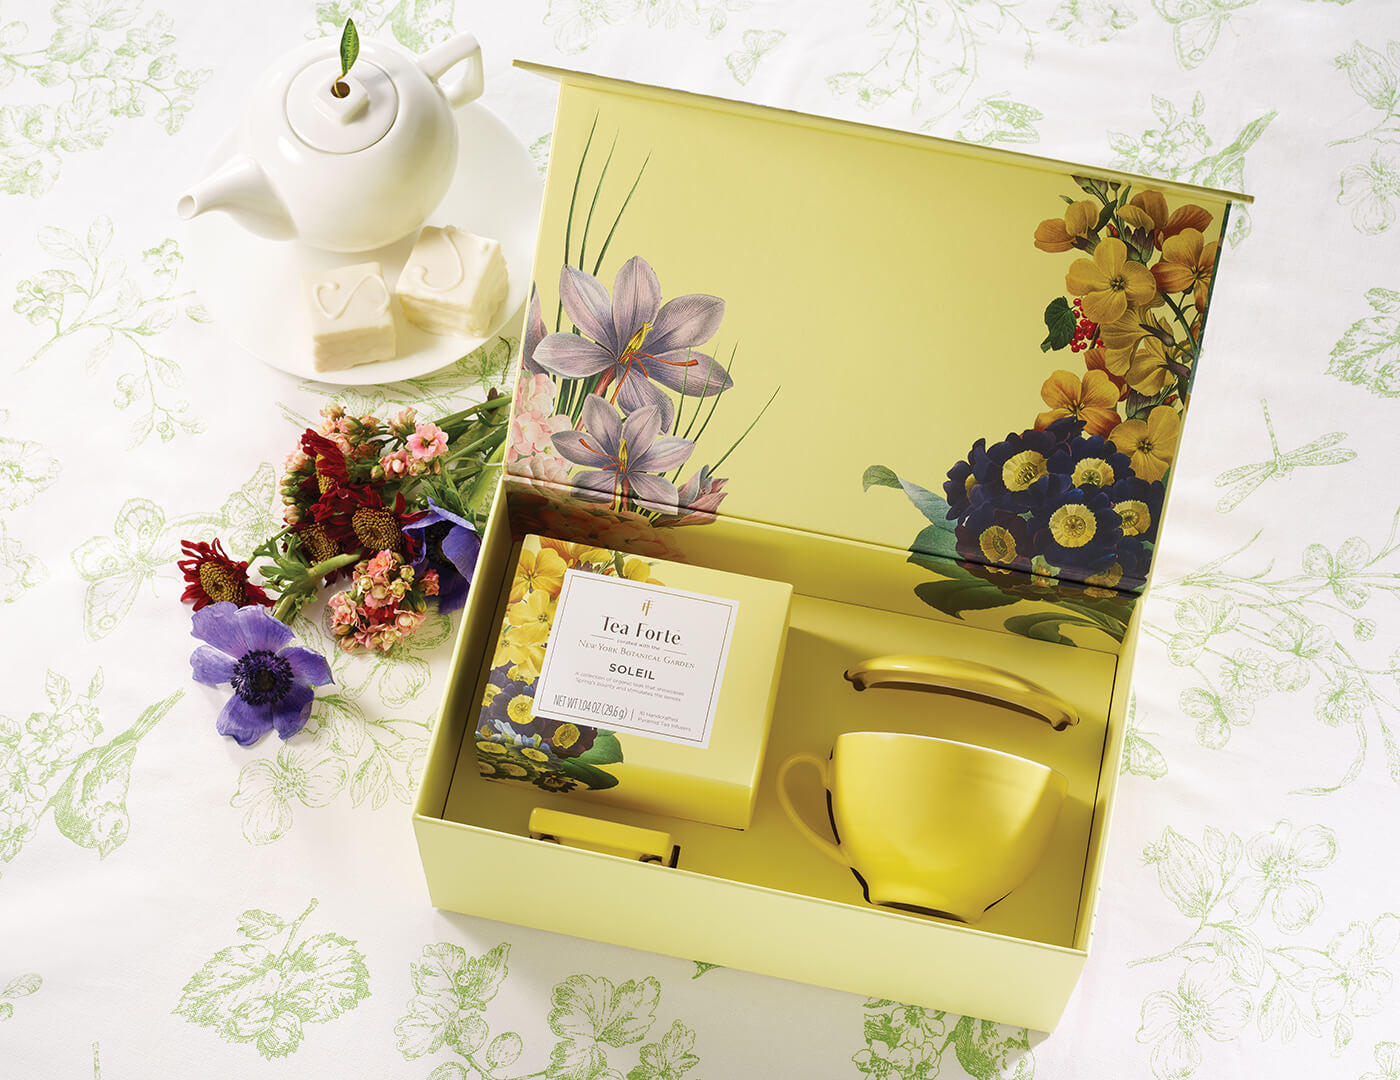 Soleil Collection Gift Set showing contents of box with lid open